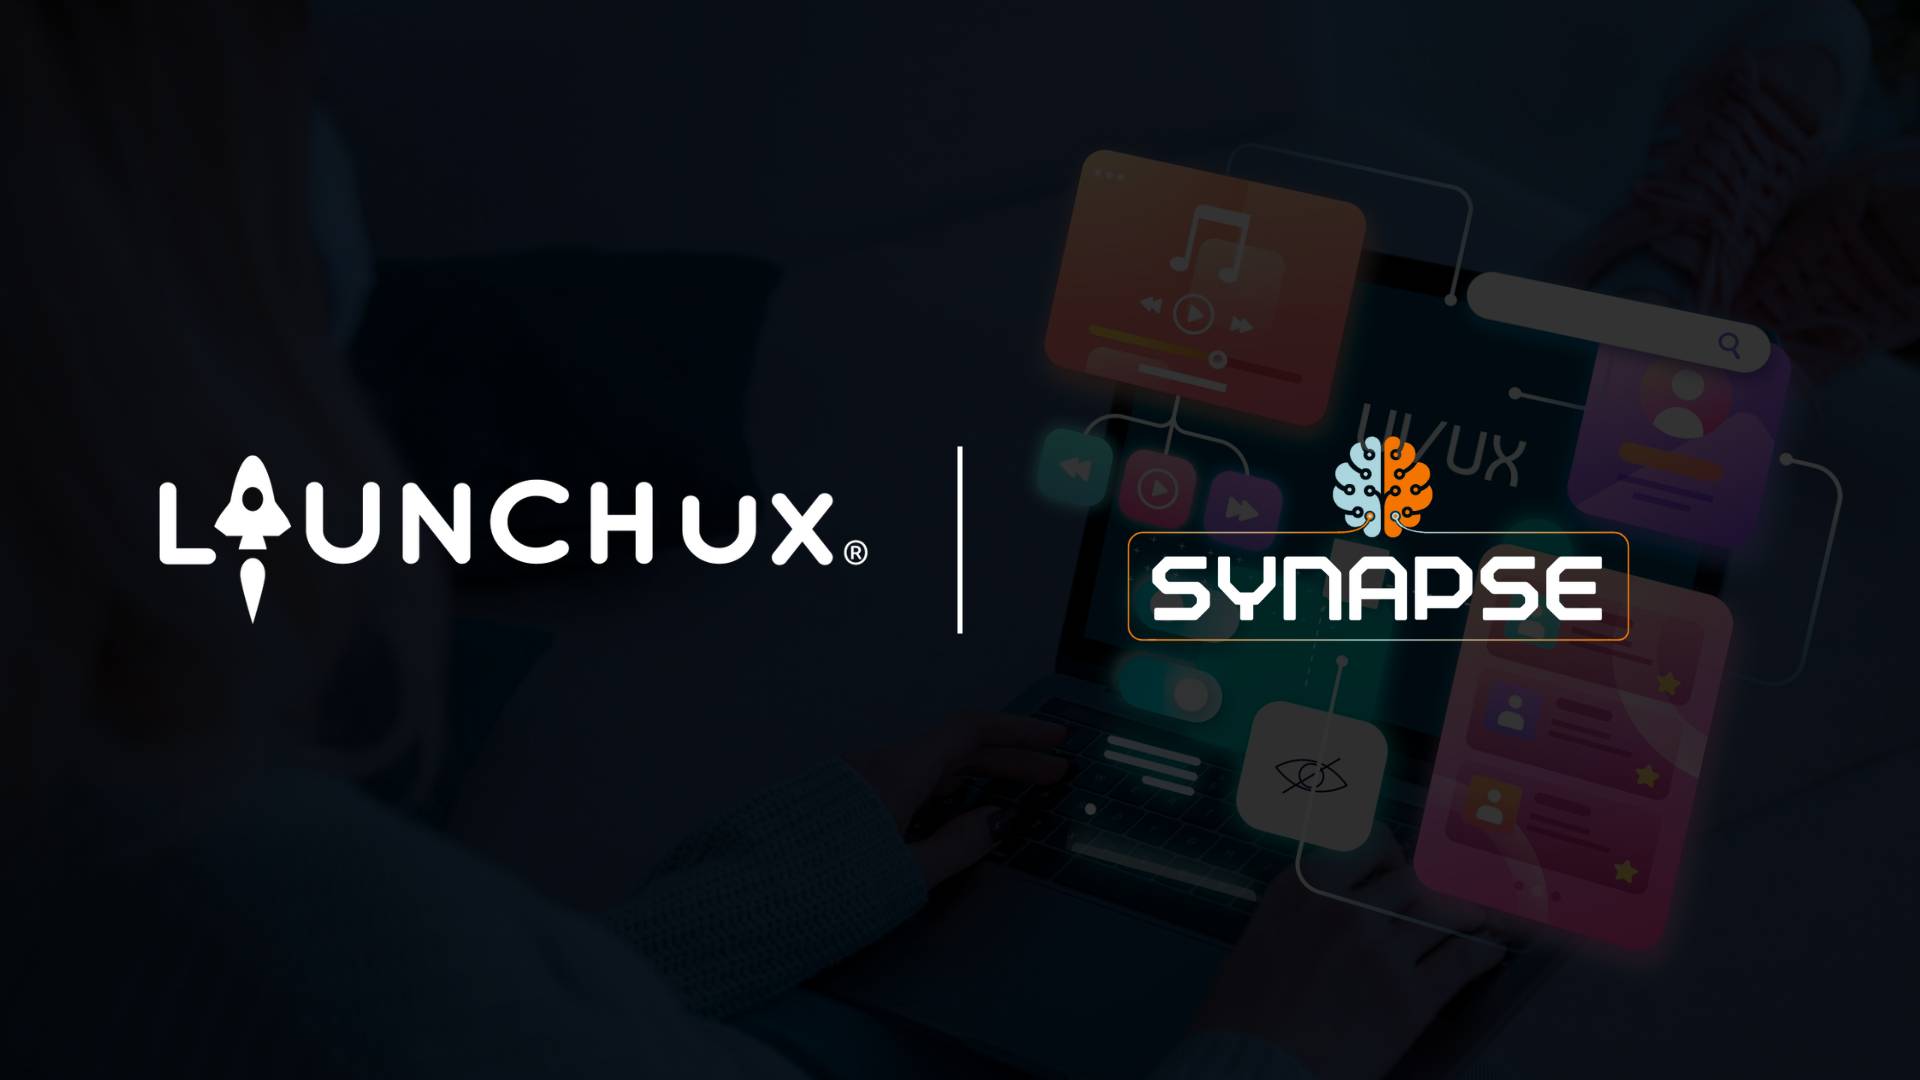 LaunchUX Introduces Synapse: Transforming Data Analysis and Customer Engagement